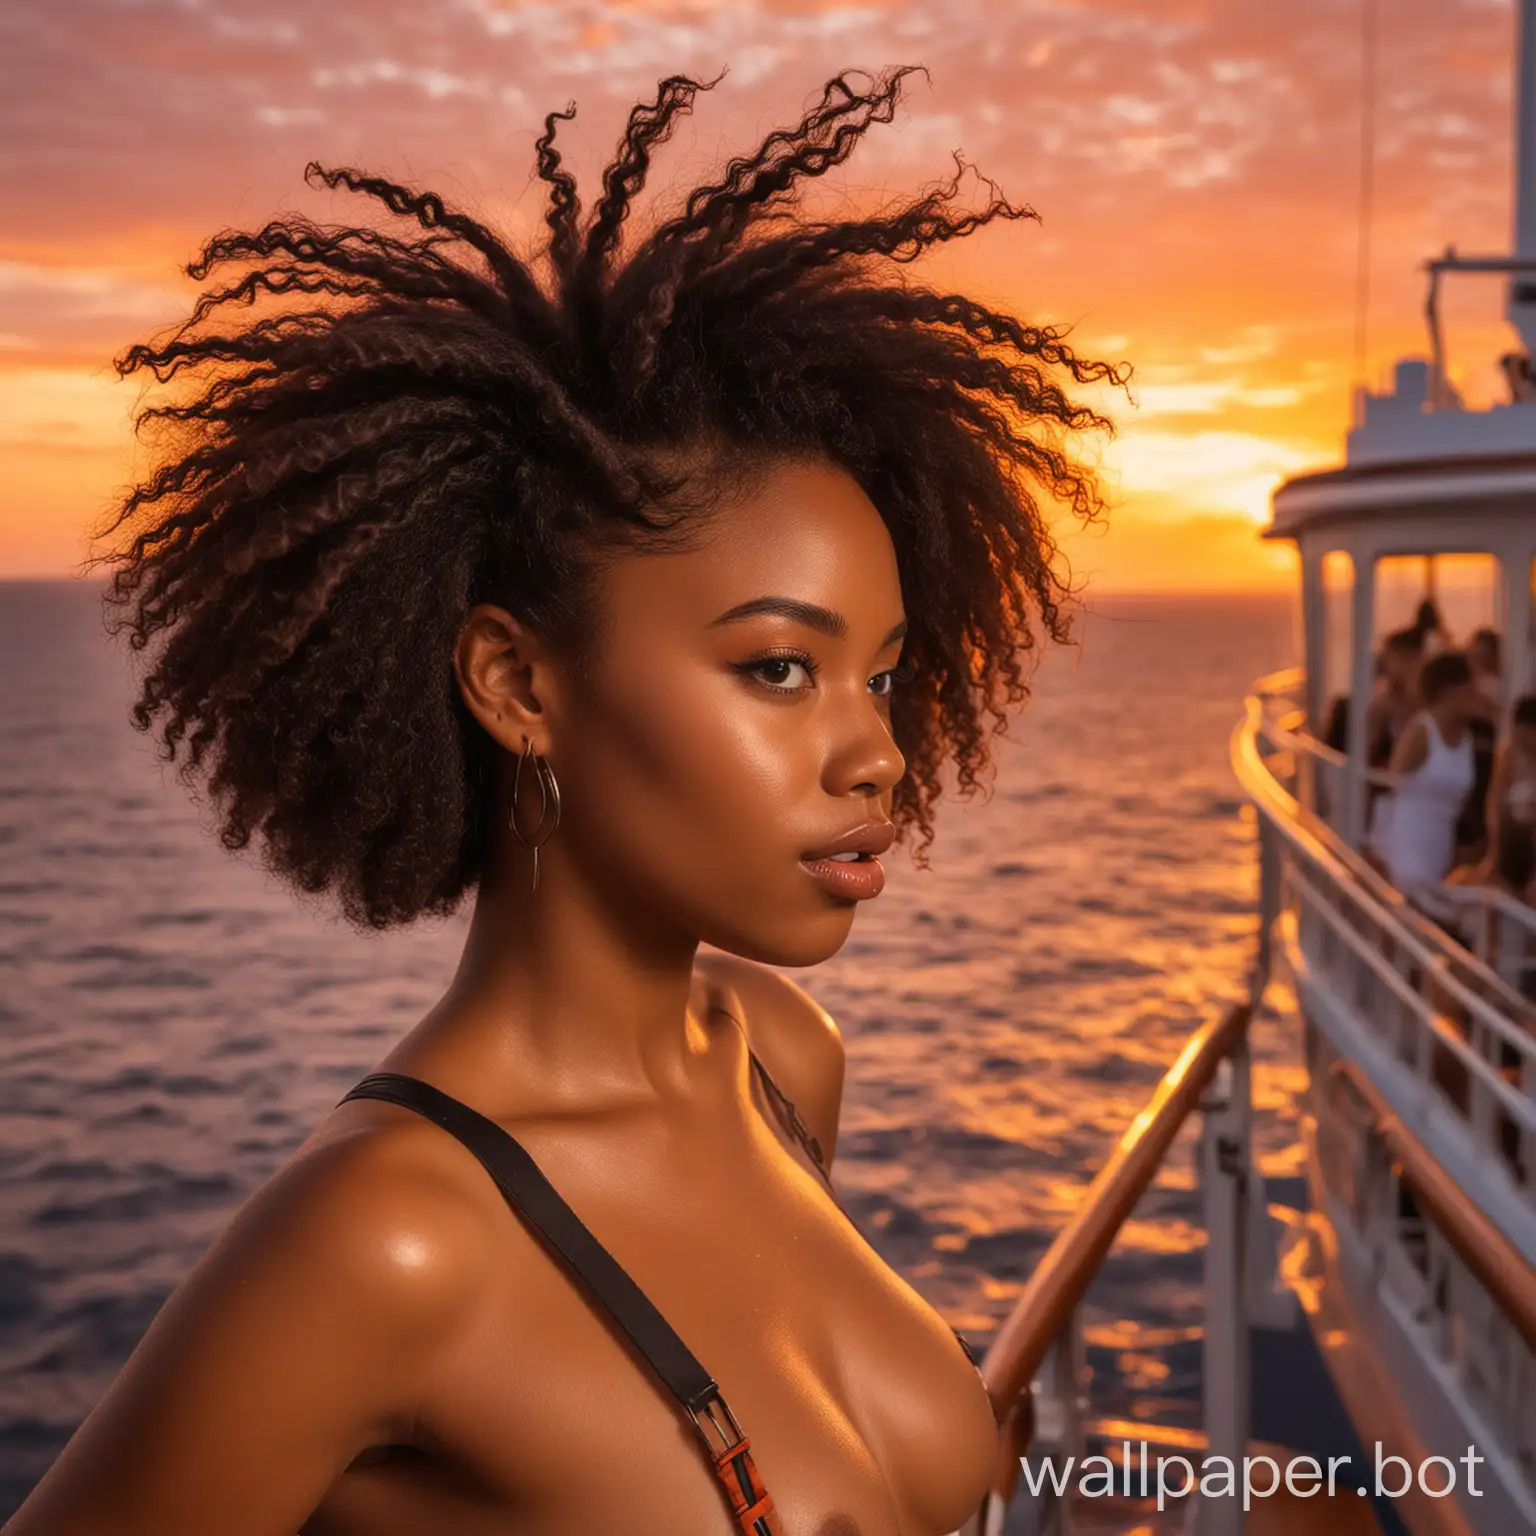 Black Brazilian girl on a luxury cruise liner at a vibrant red and orange sunset in the background peeking behind her hair that is blowing through her hair wearing a straps that accentuates nudity